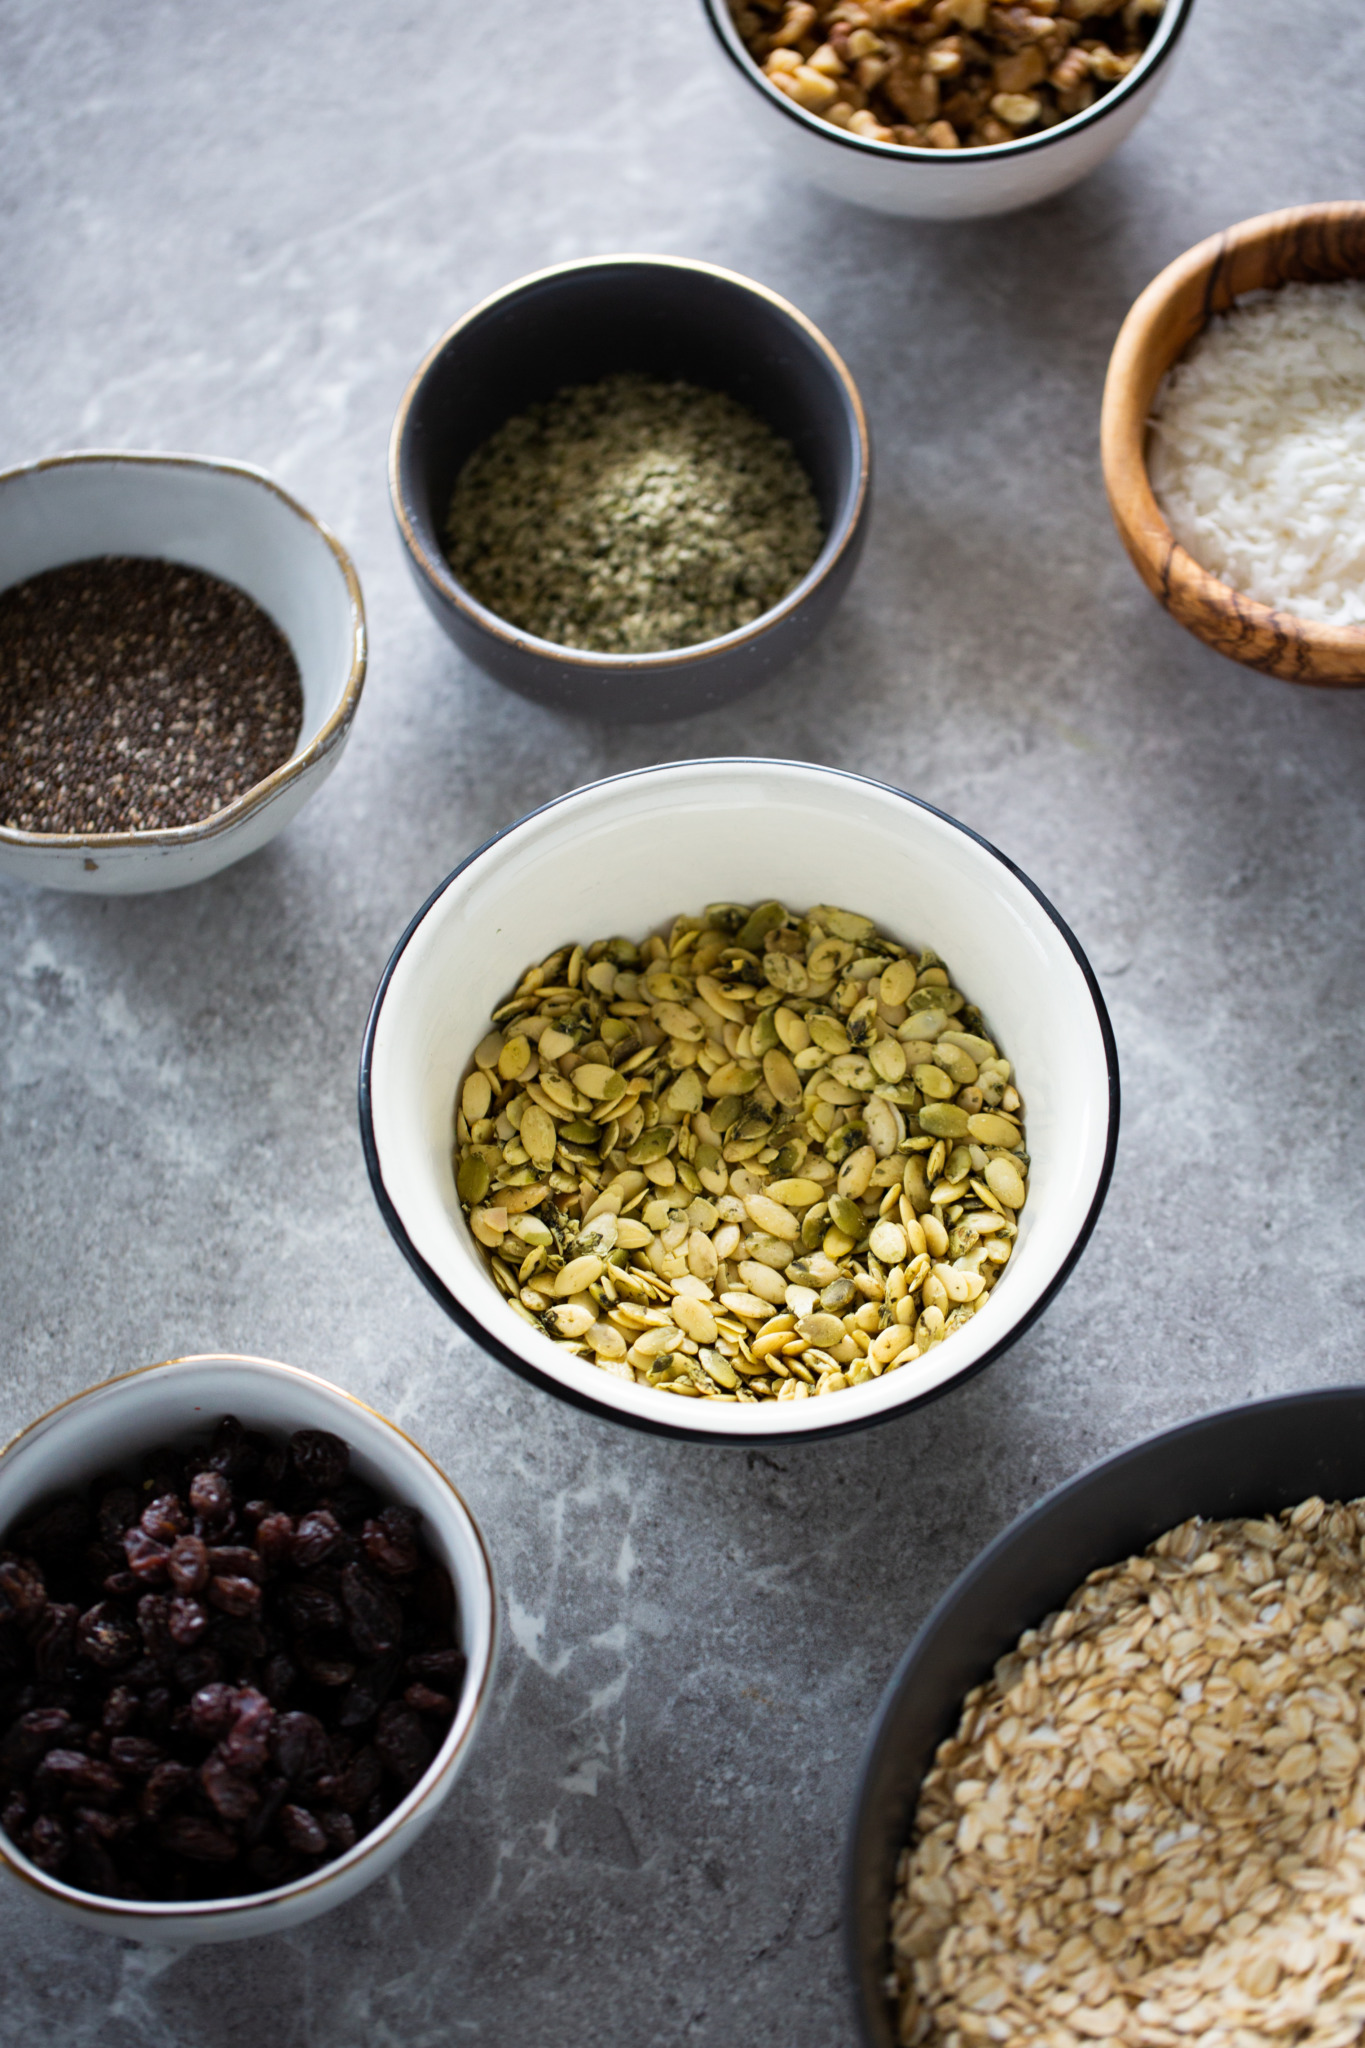 nuts, seeds and other ingredients for making granola